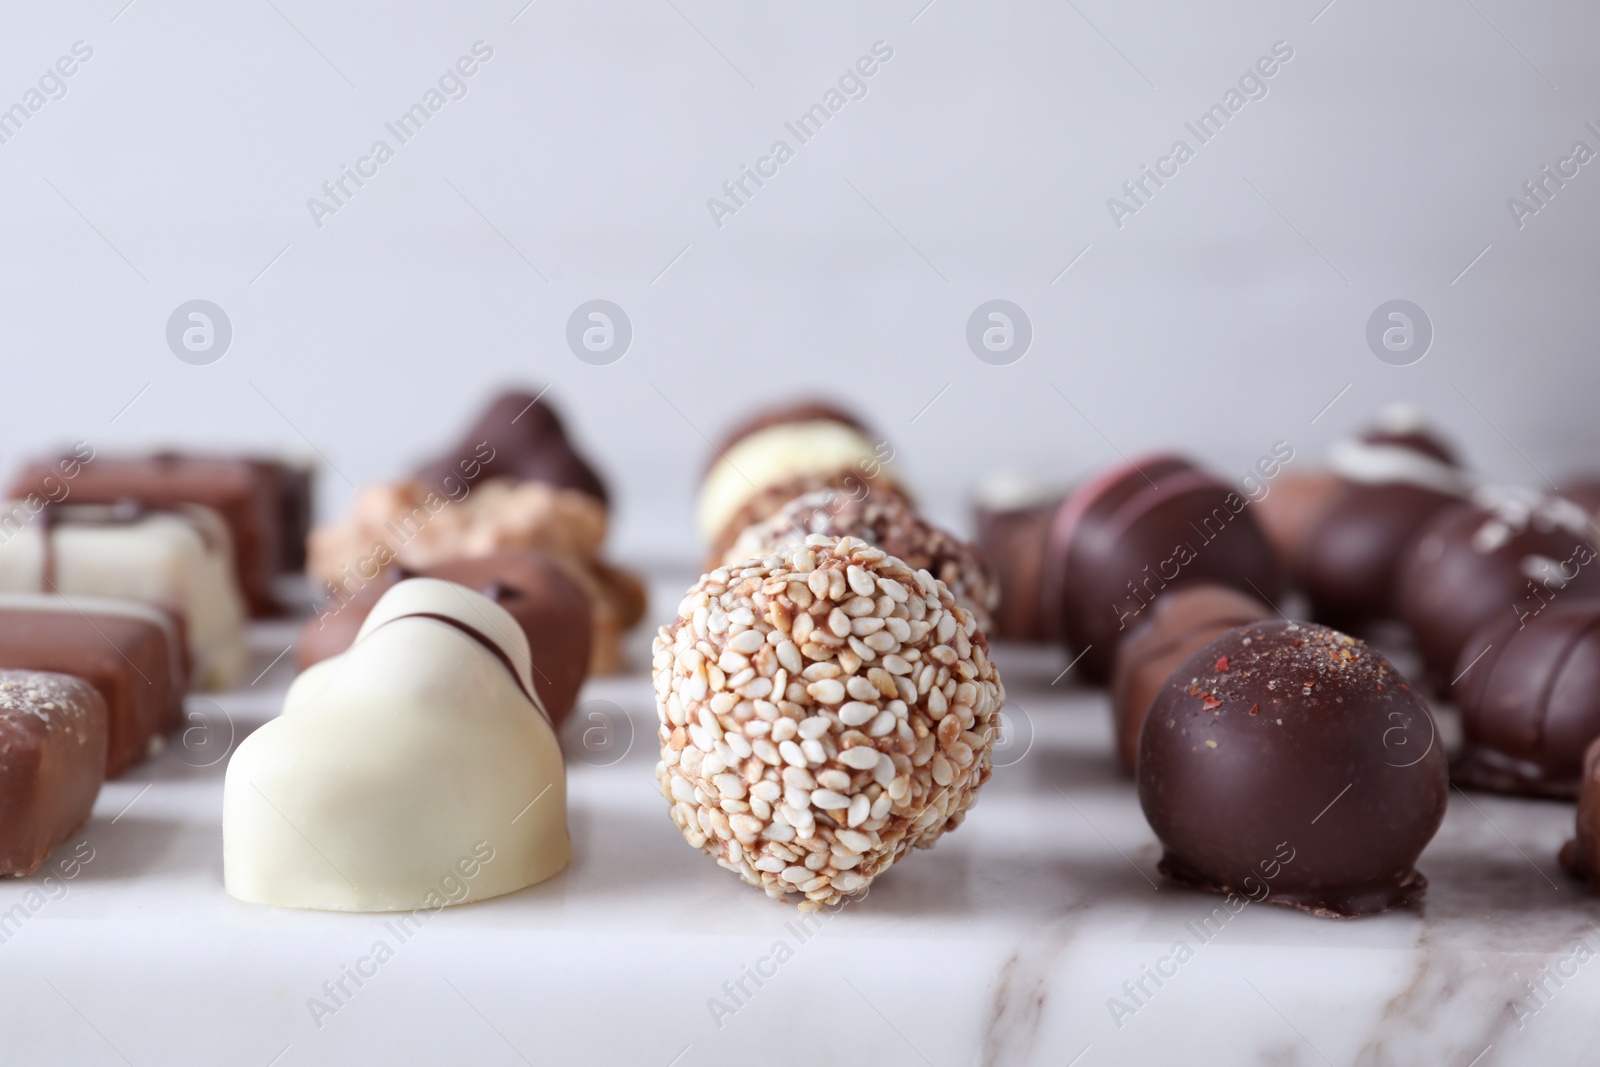 Photo of Different tasty chocolate candies on white marble table